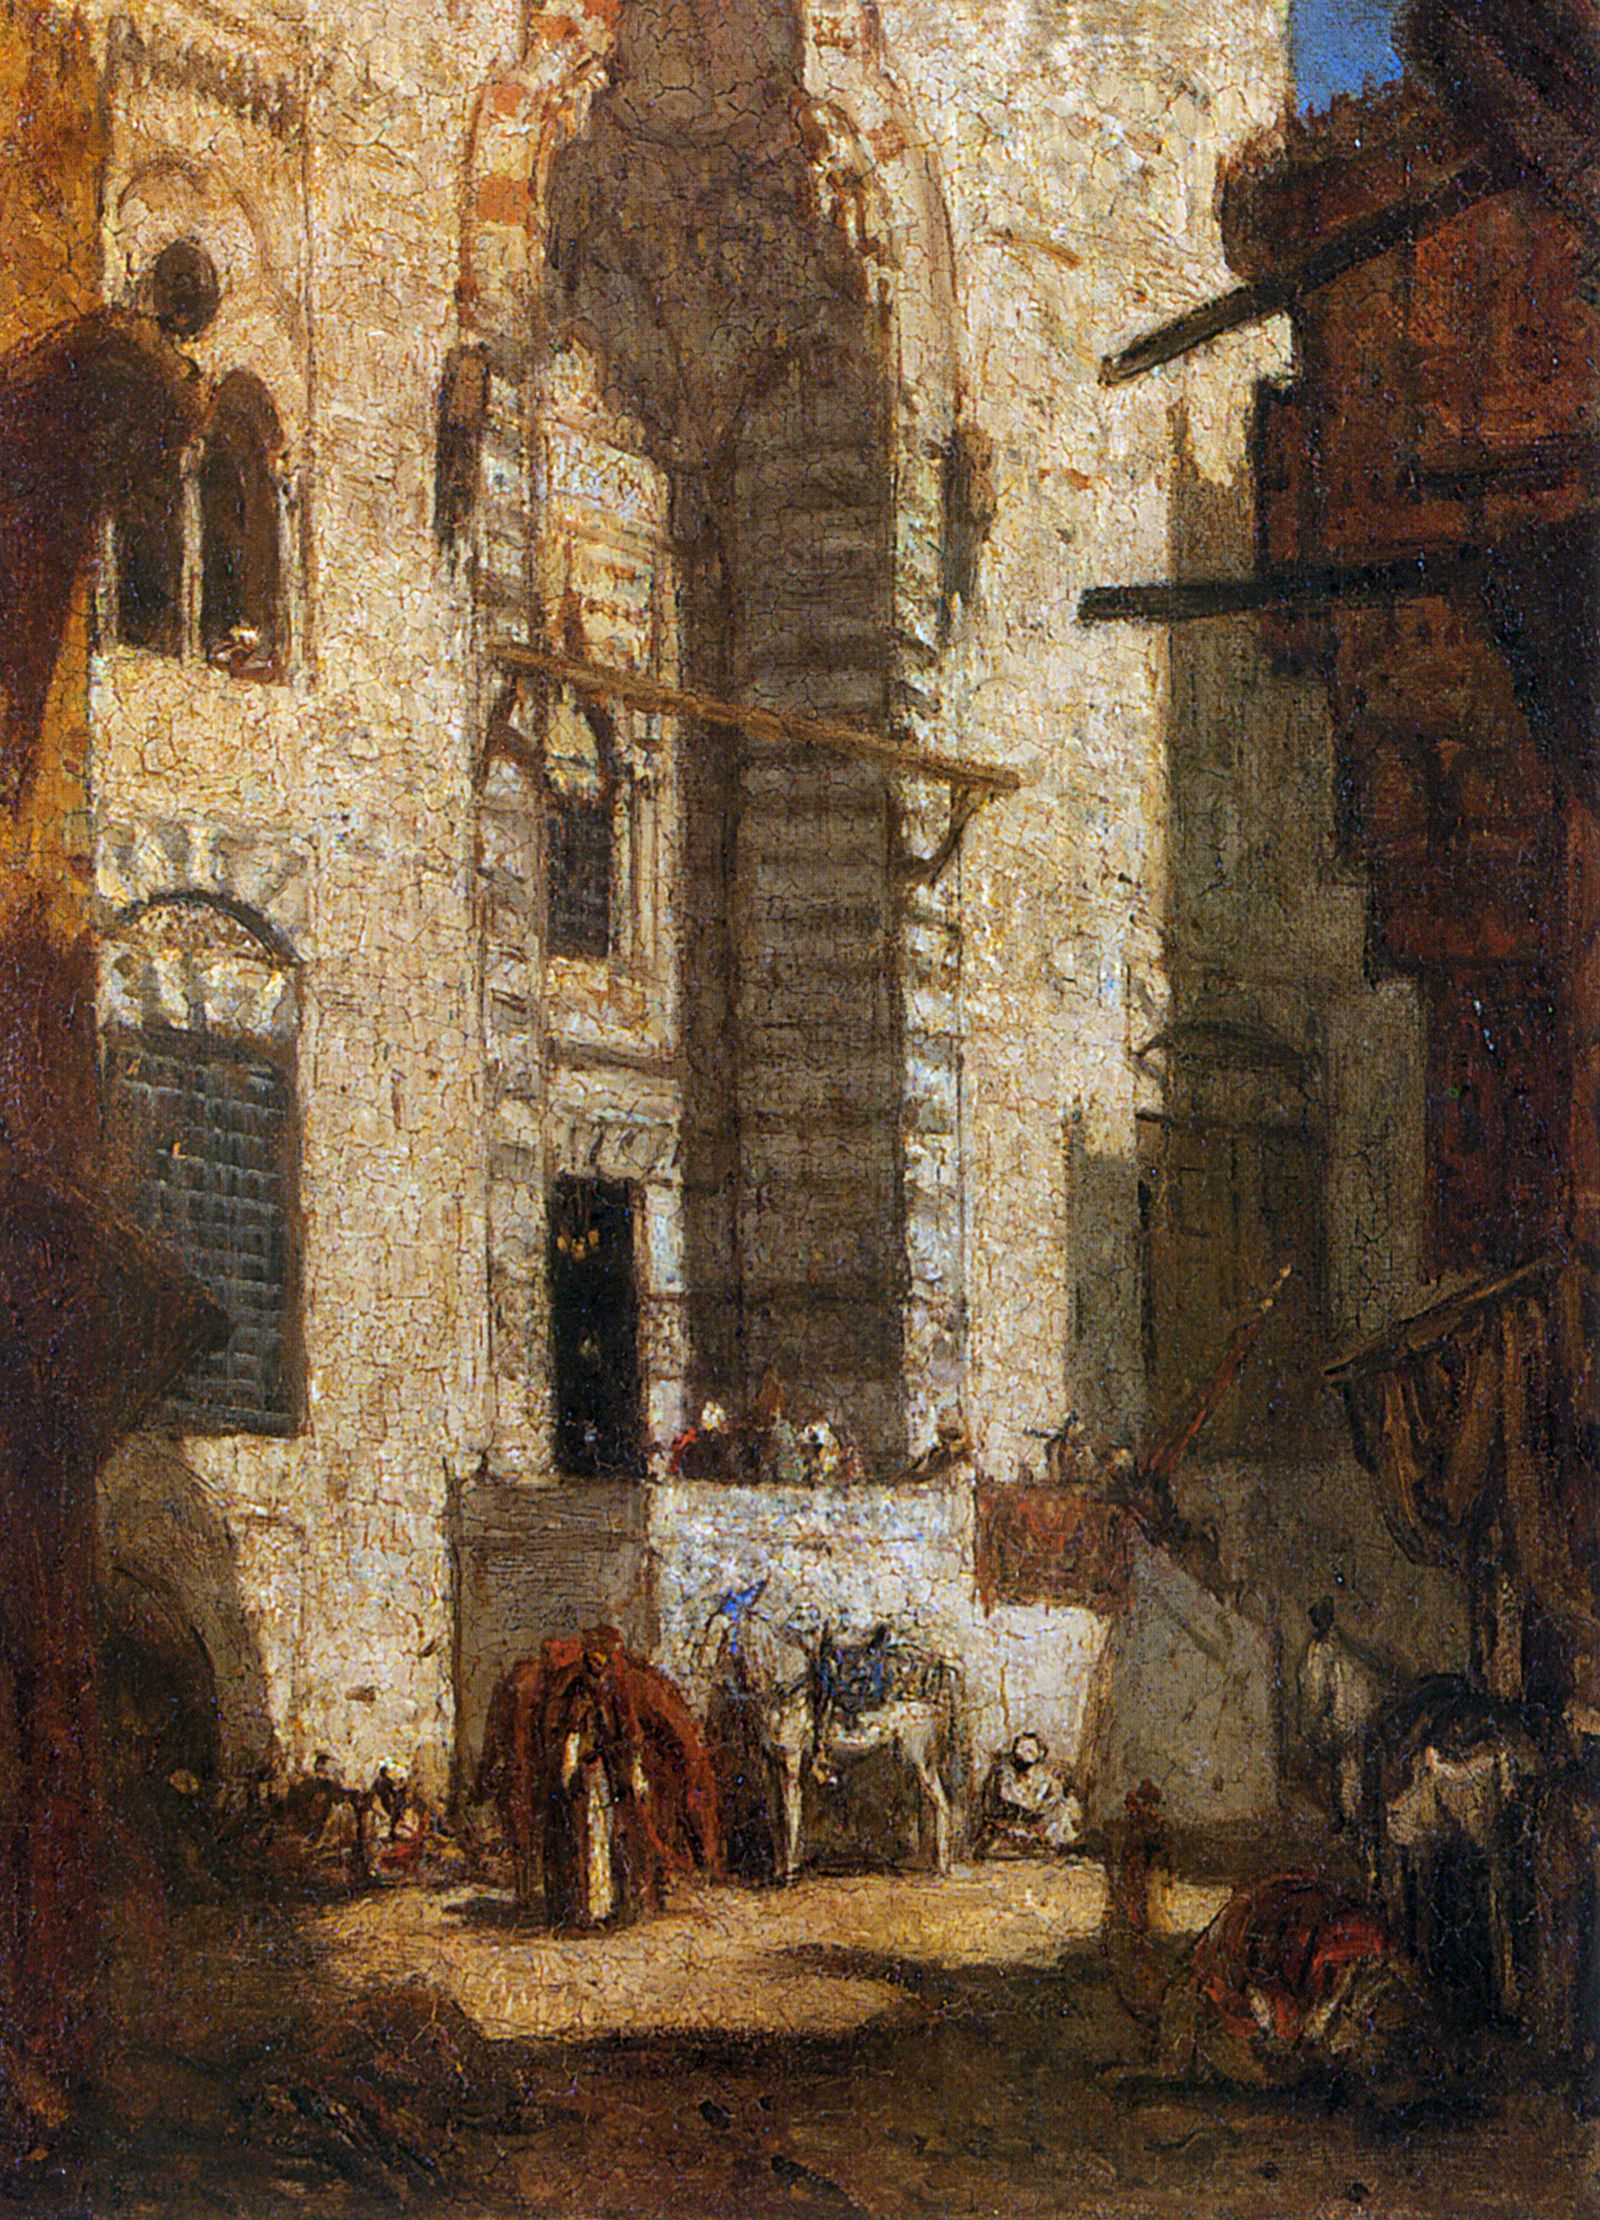 Mosque at Cairo by Marius Bauer